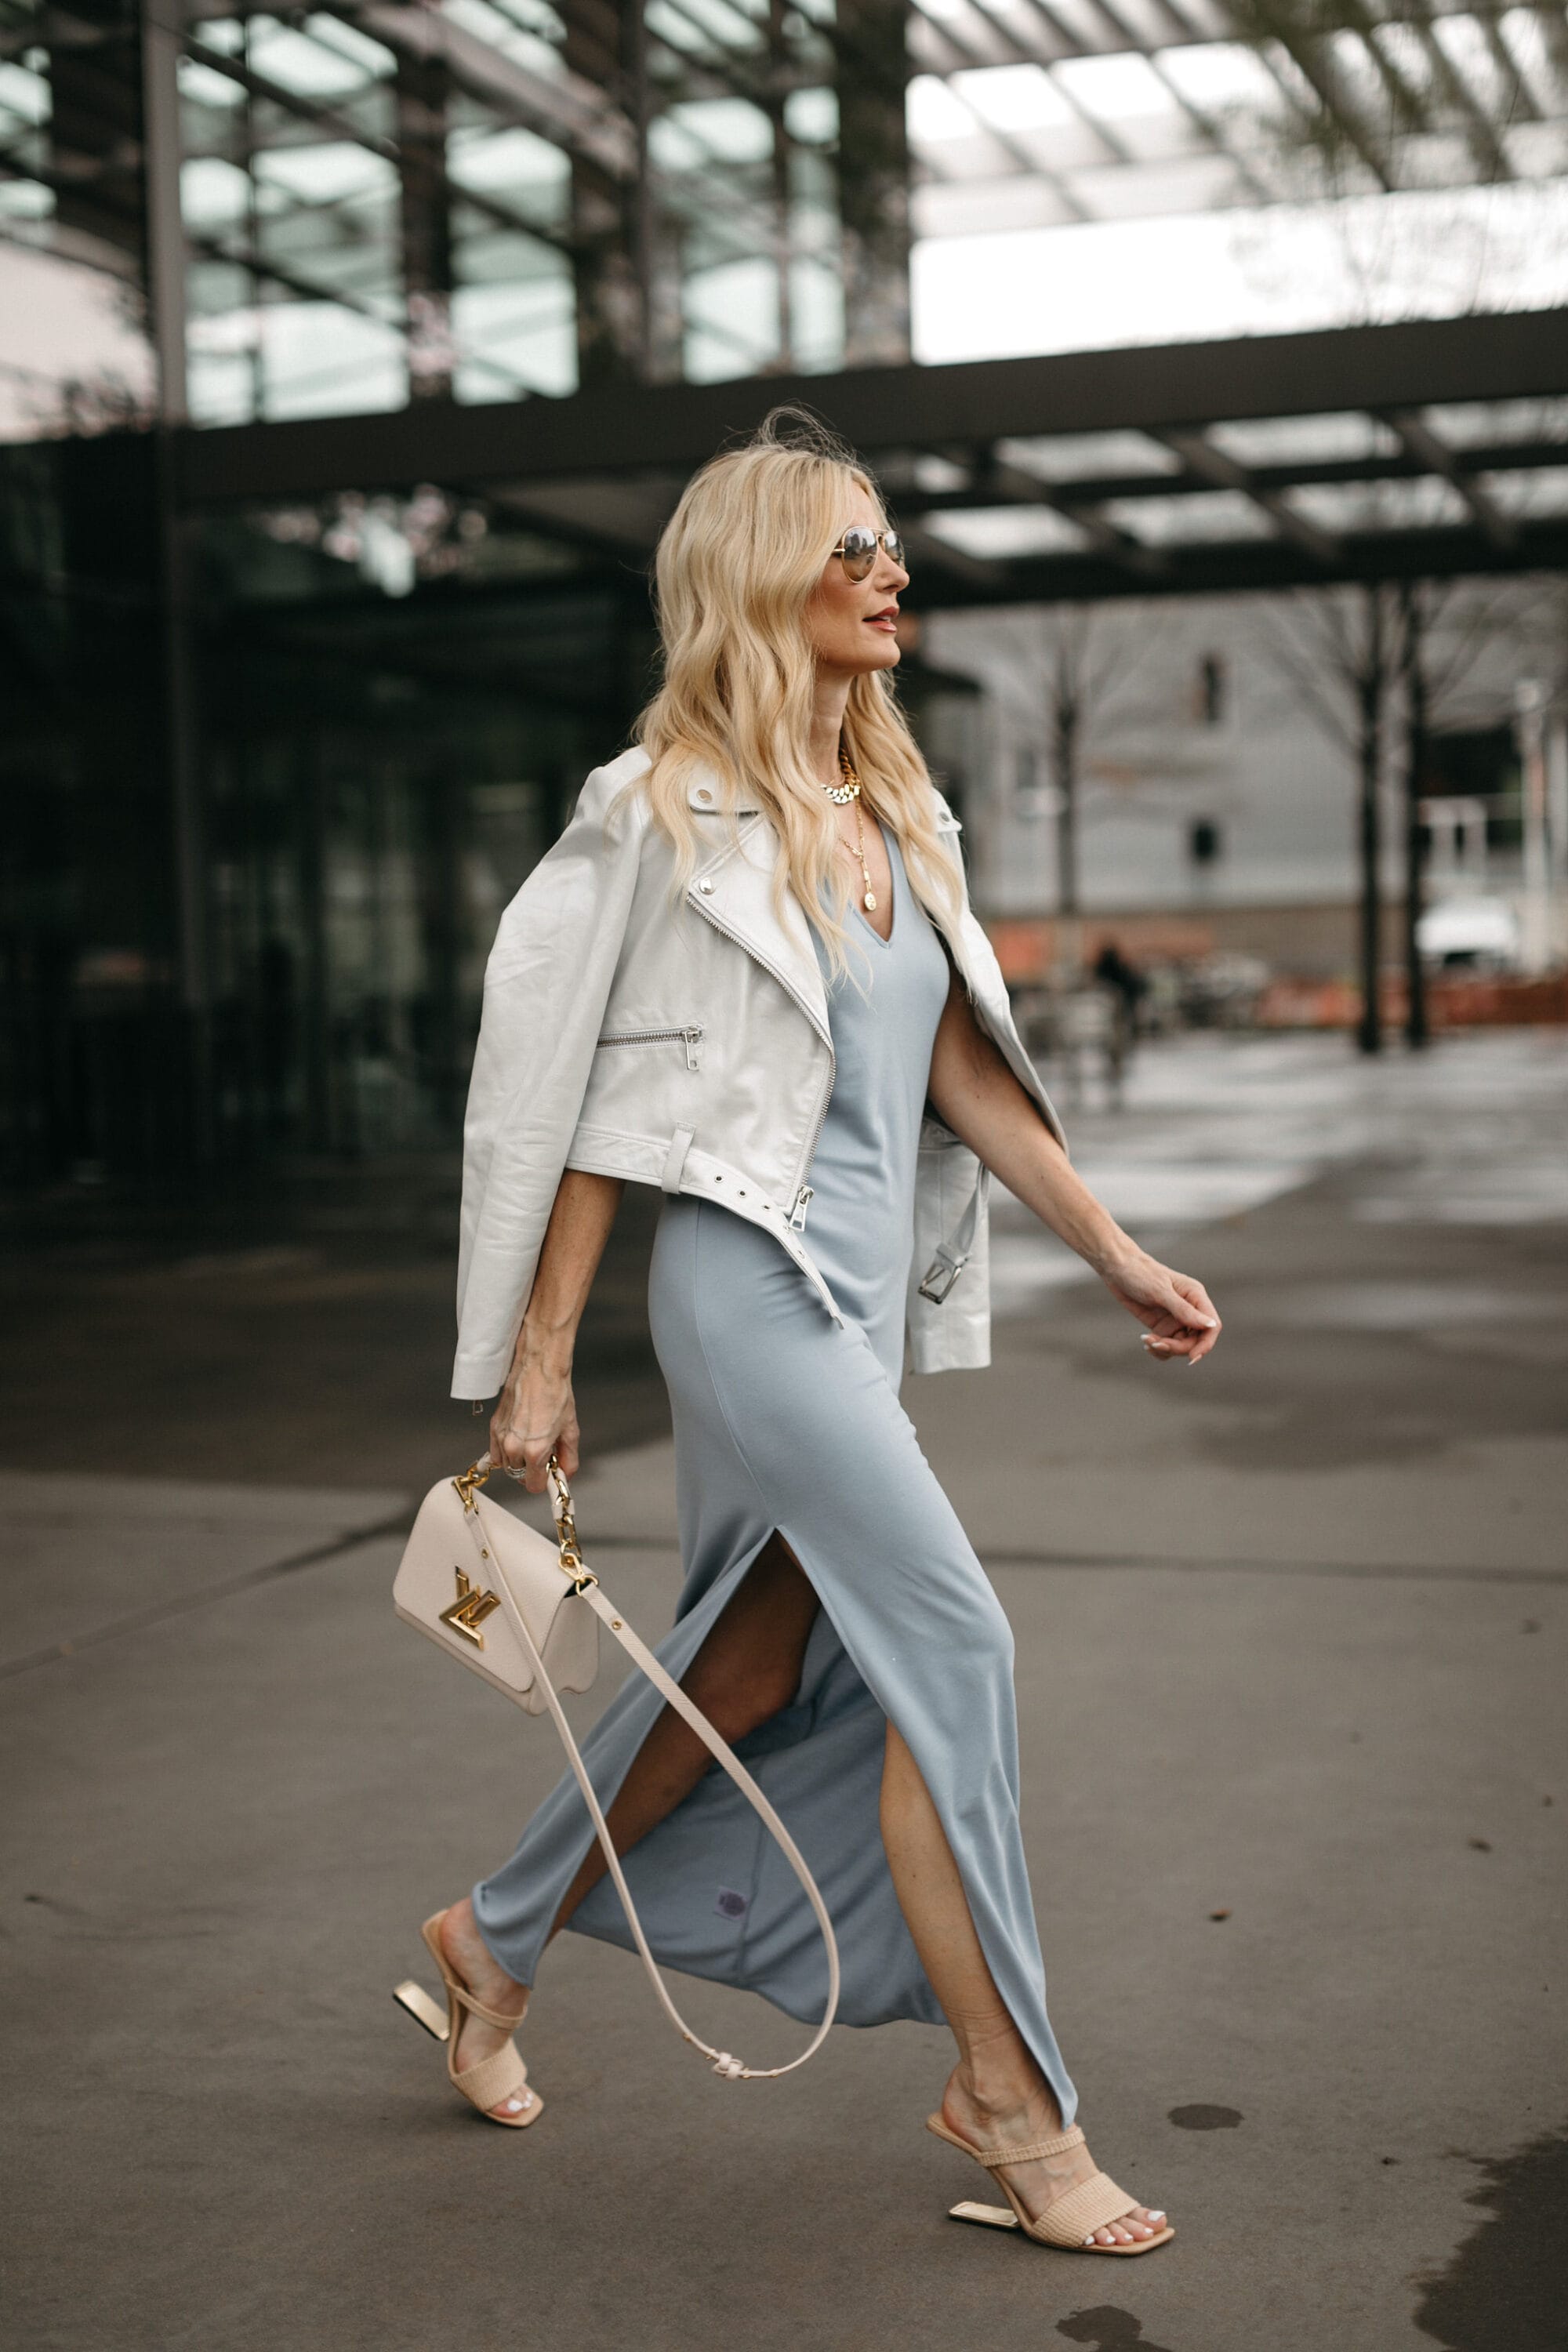 Over 40 fashion influencer wearing maxi dress with cropped blazer for spring 2023.